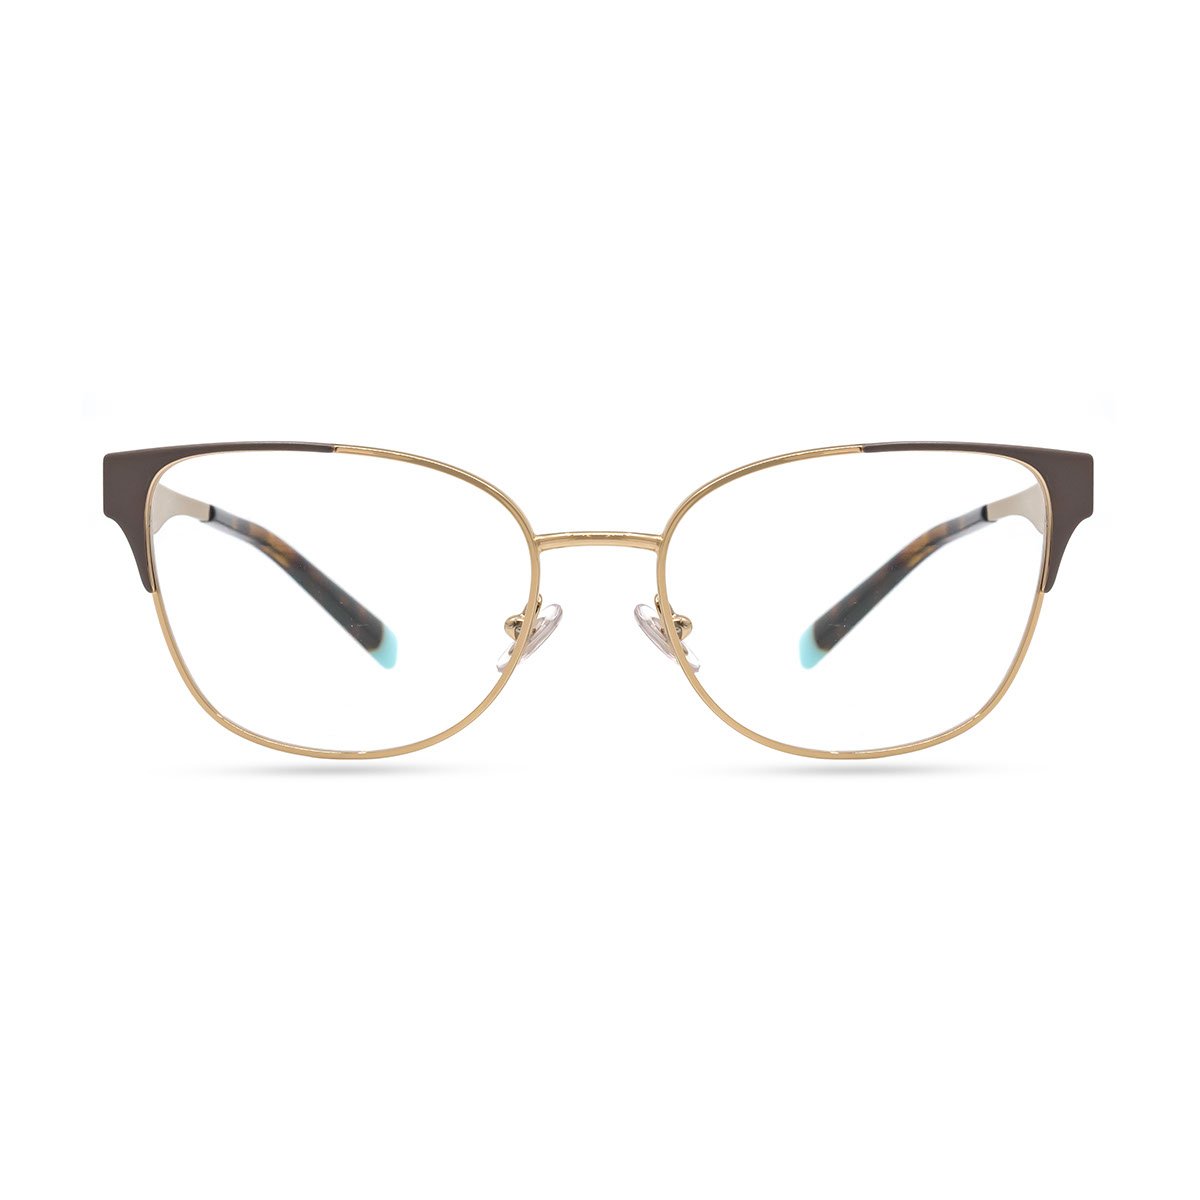 TIFFANY & CO TF 1135 6133 spectacle-frame